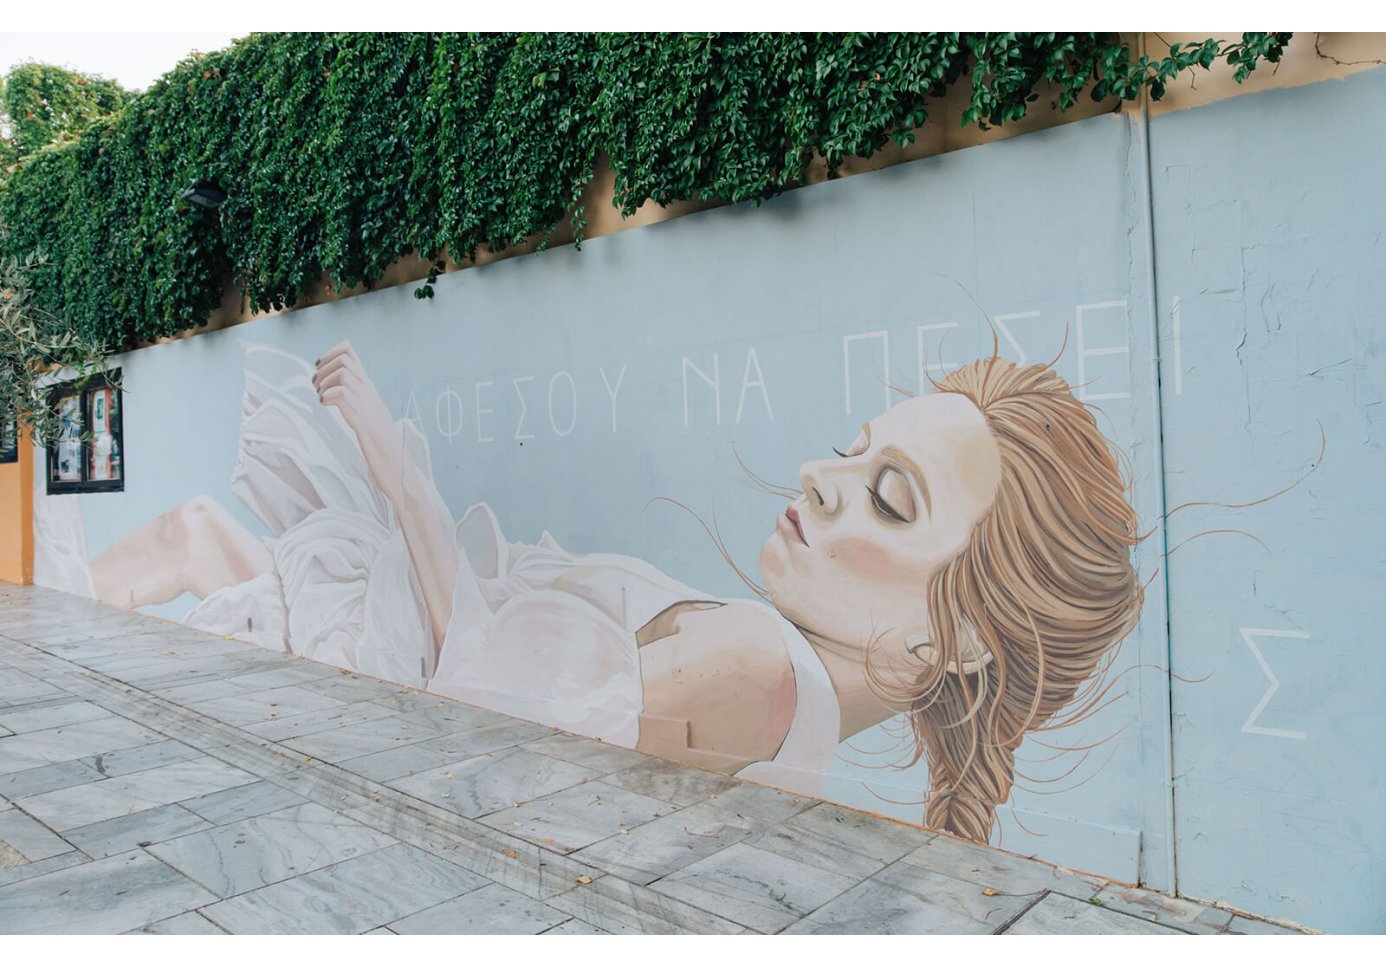 Let Yourself Fall by Duo Amazonas graffiti on the wall of Thiseion cinema in Athens. 